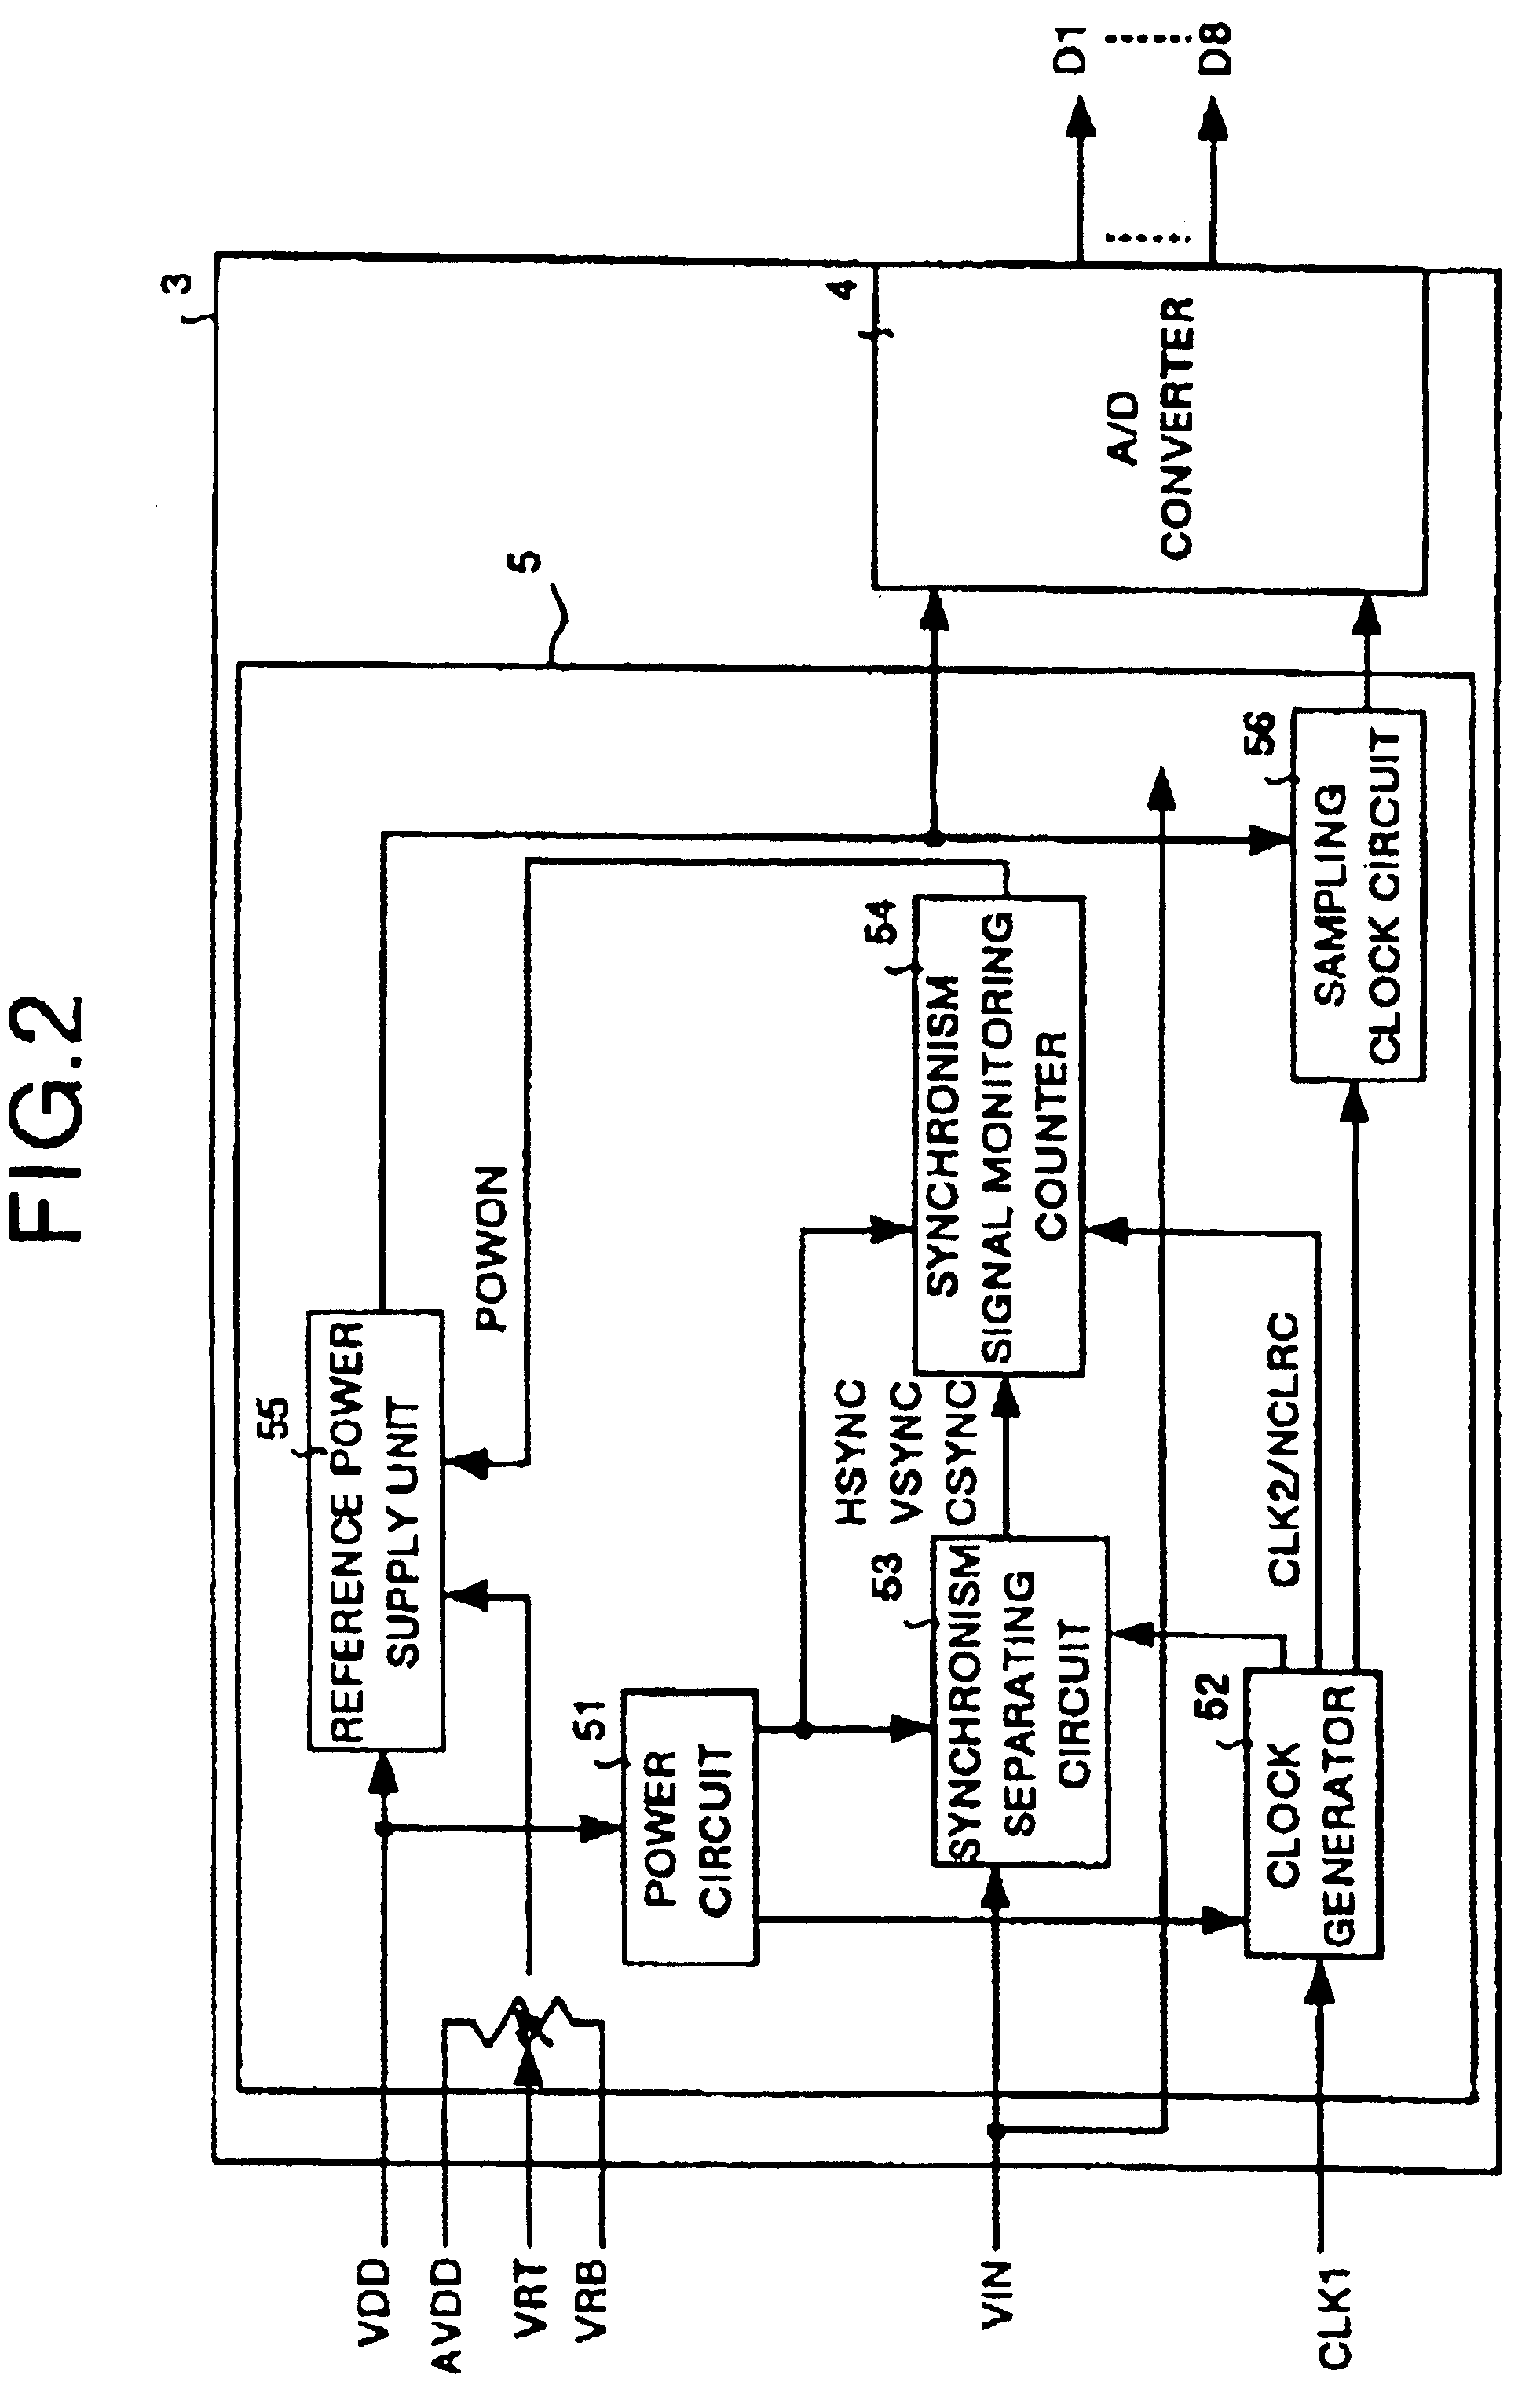 Video signal processing circuit and computer system